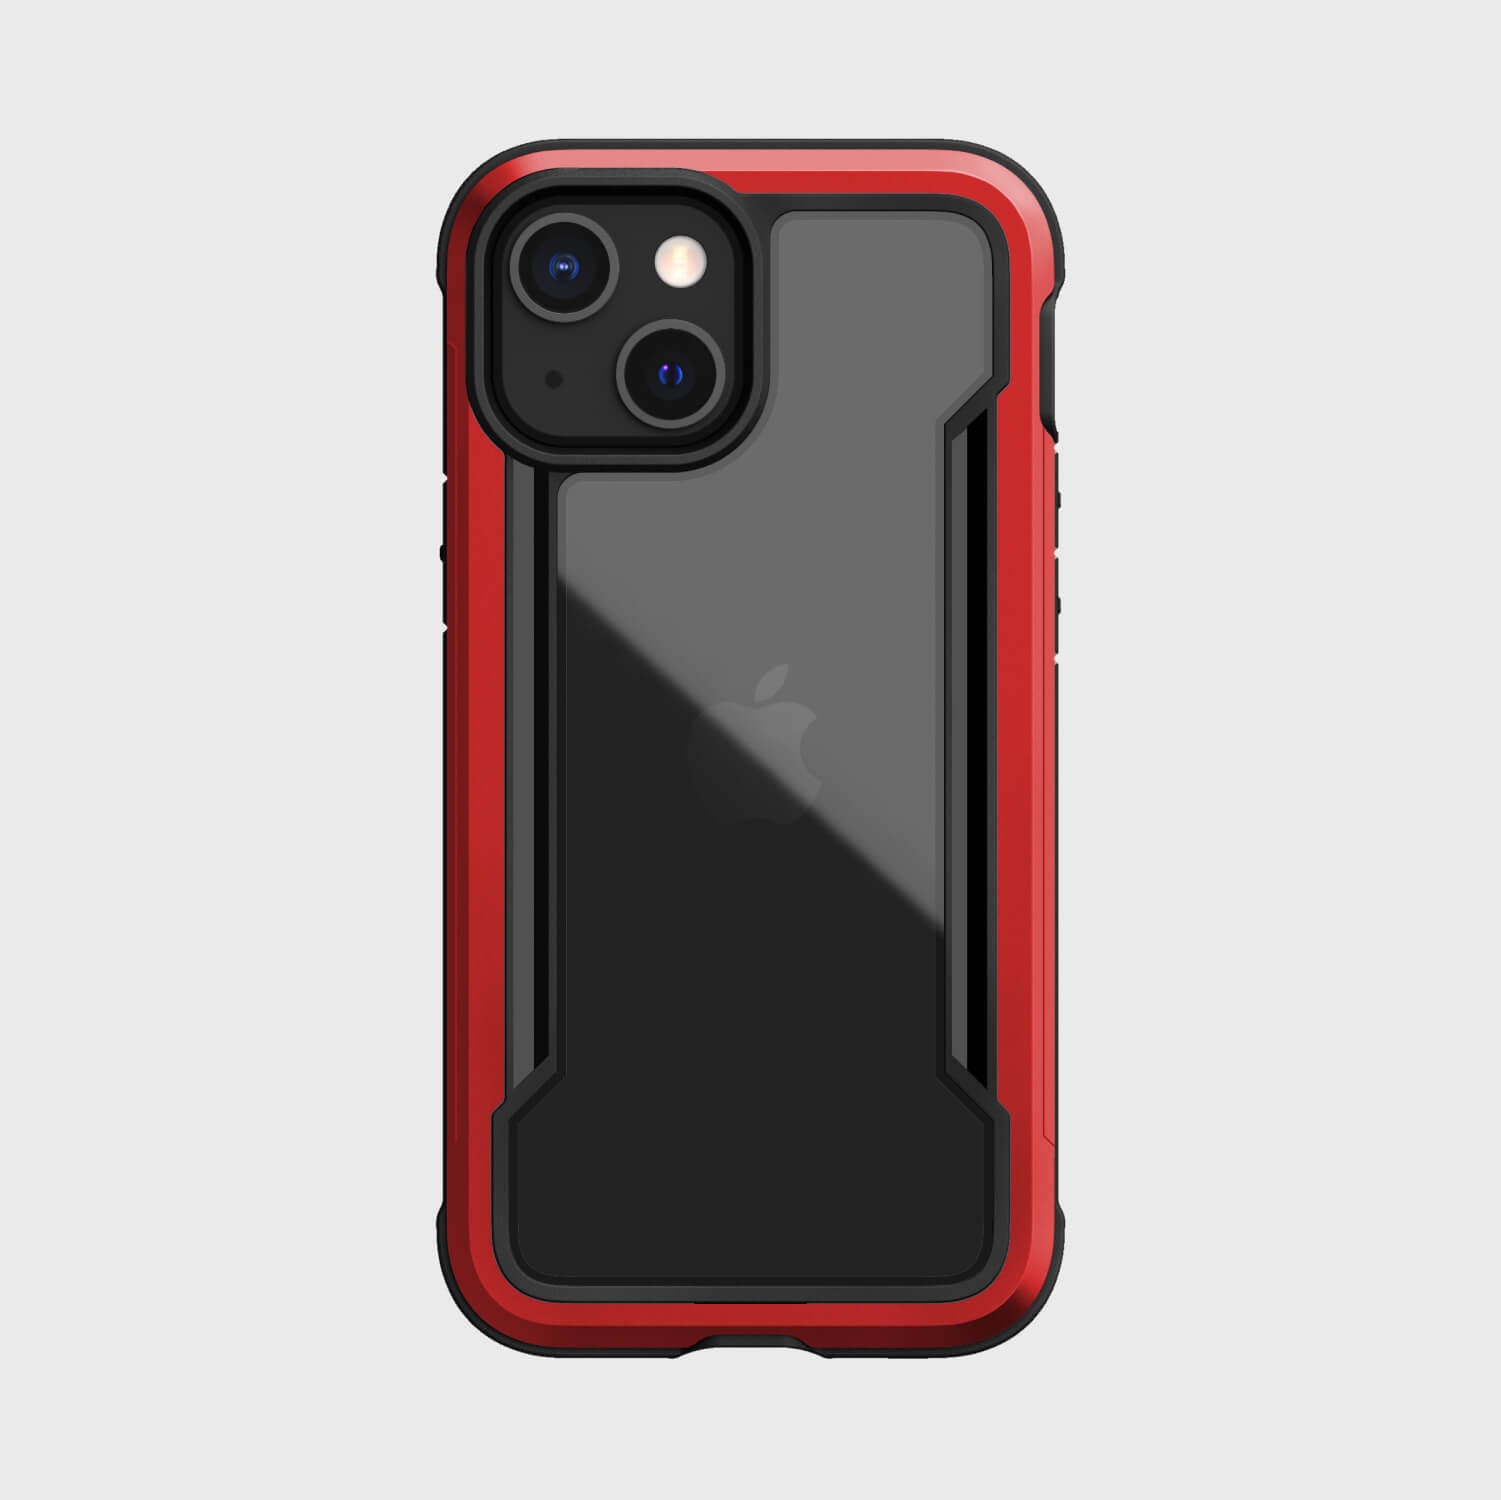 The back of an iPhone 13 Mini Case - SHIELD PRO in red and black, by Raptic.